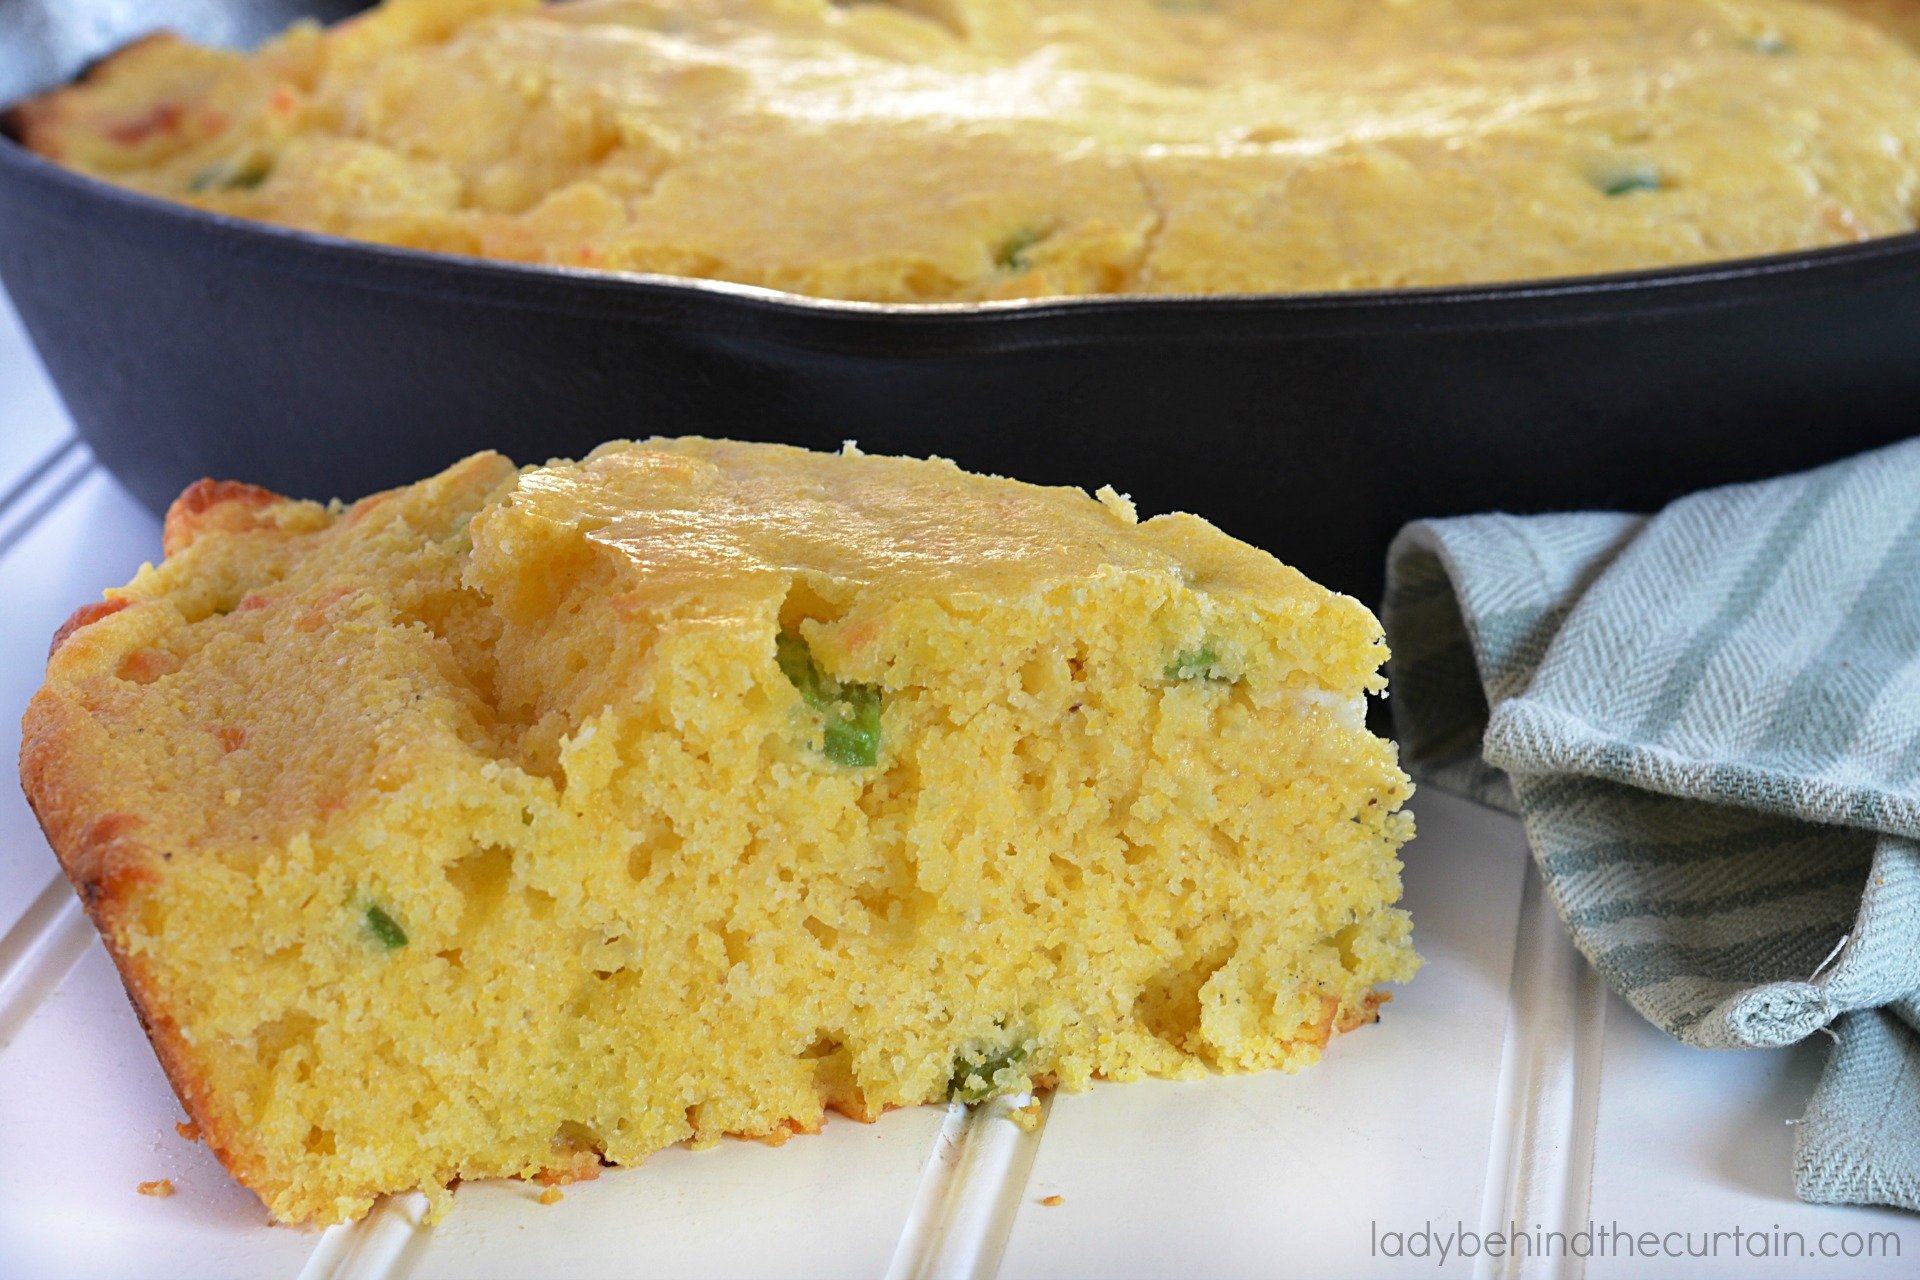 Made from Scratch Jalapeno Cornbread